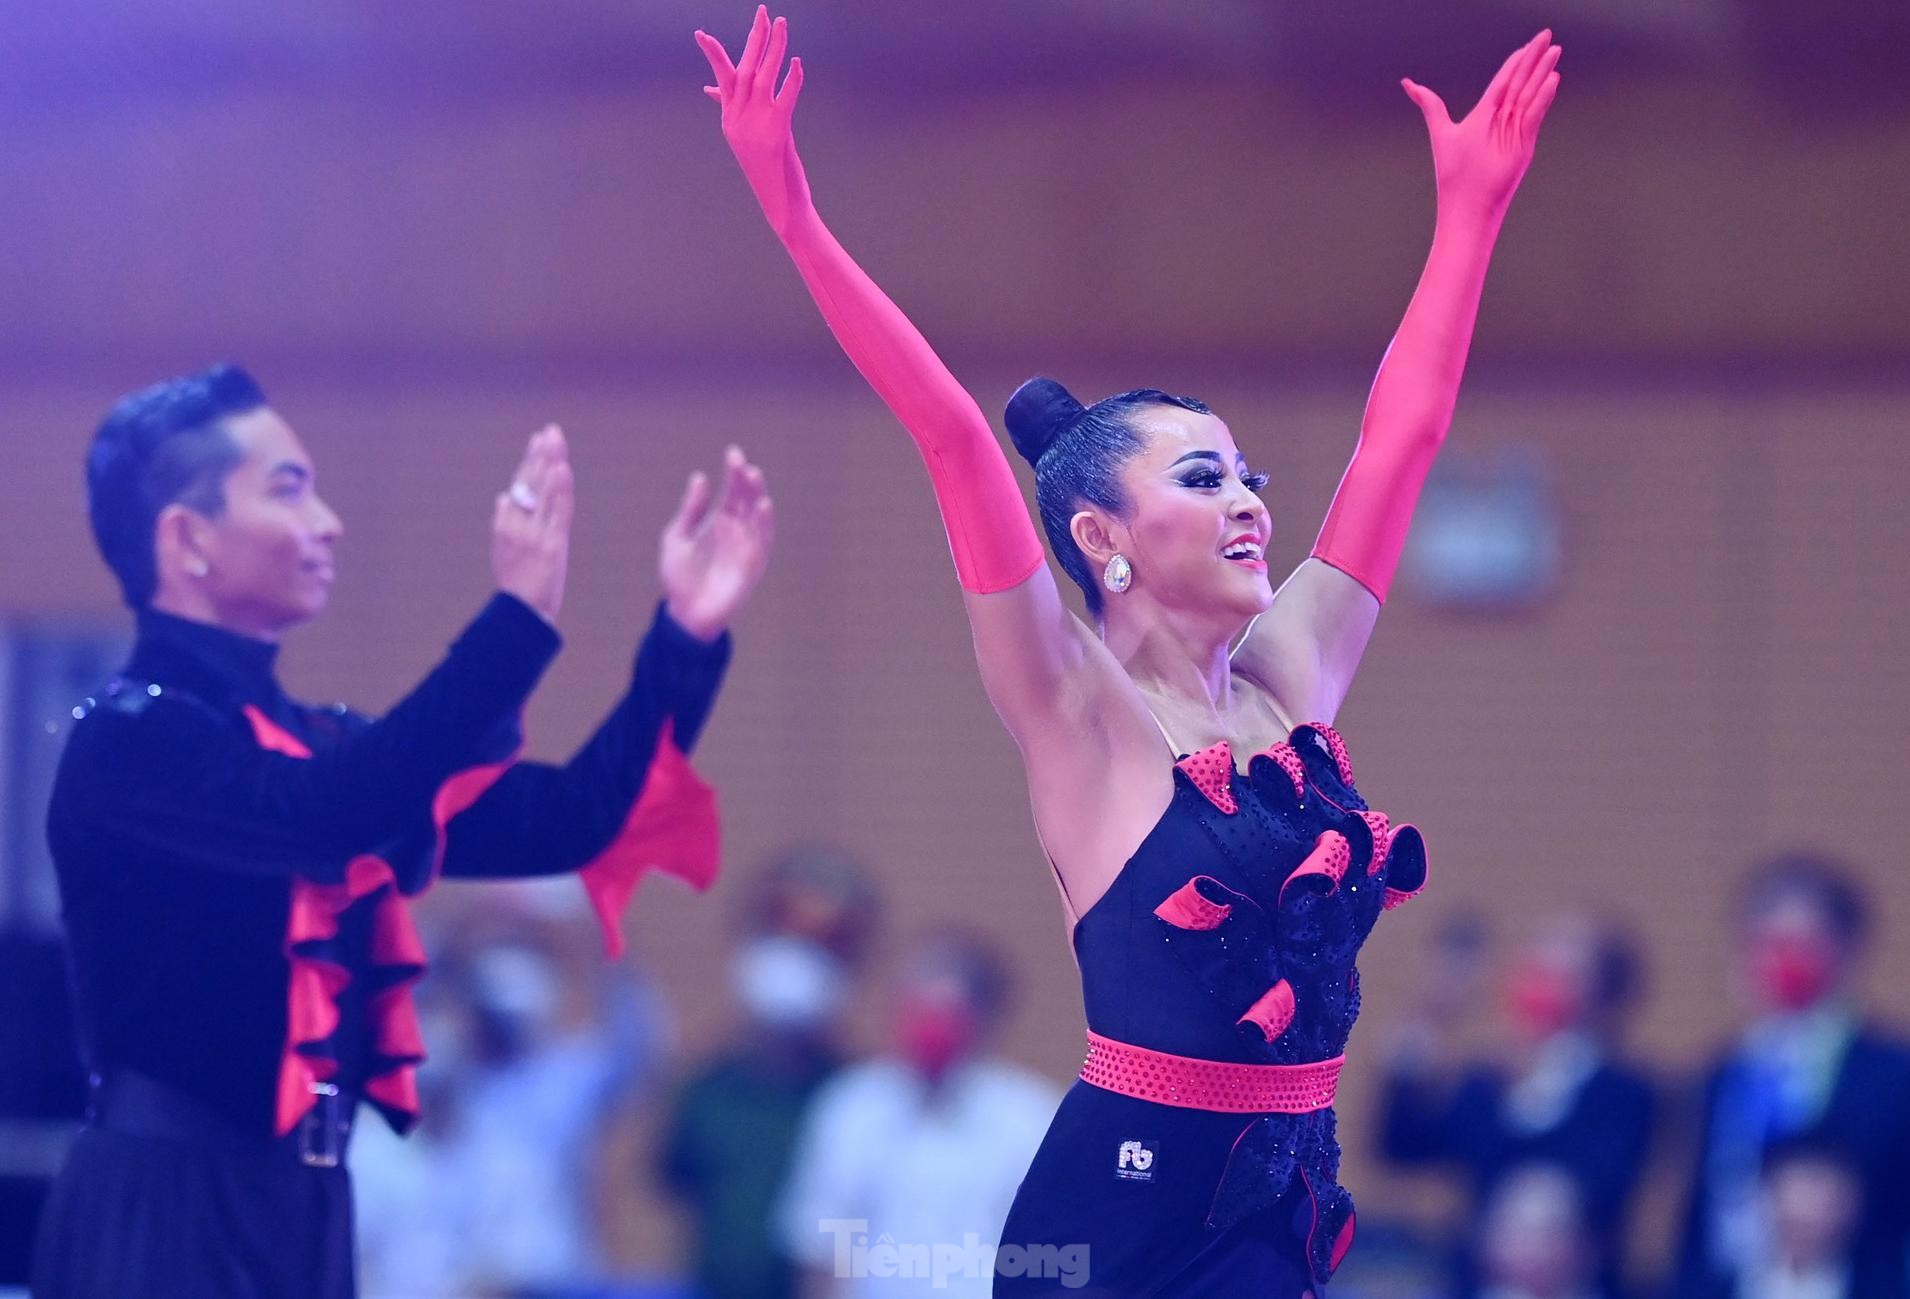 Watch the mesmerizing dance that helped Dancesport Vietnam win 5 gold medals at the 31st SEA Games - Photo 6.